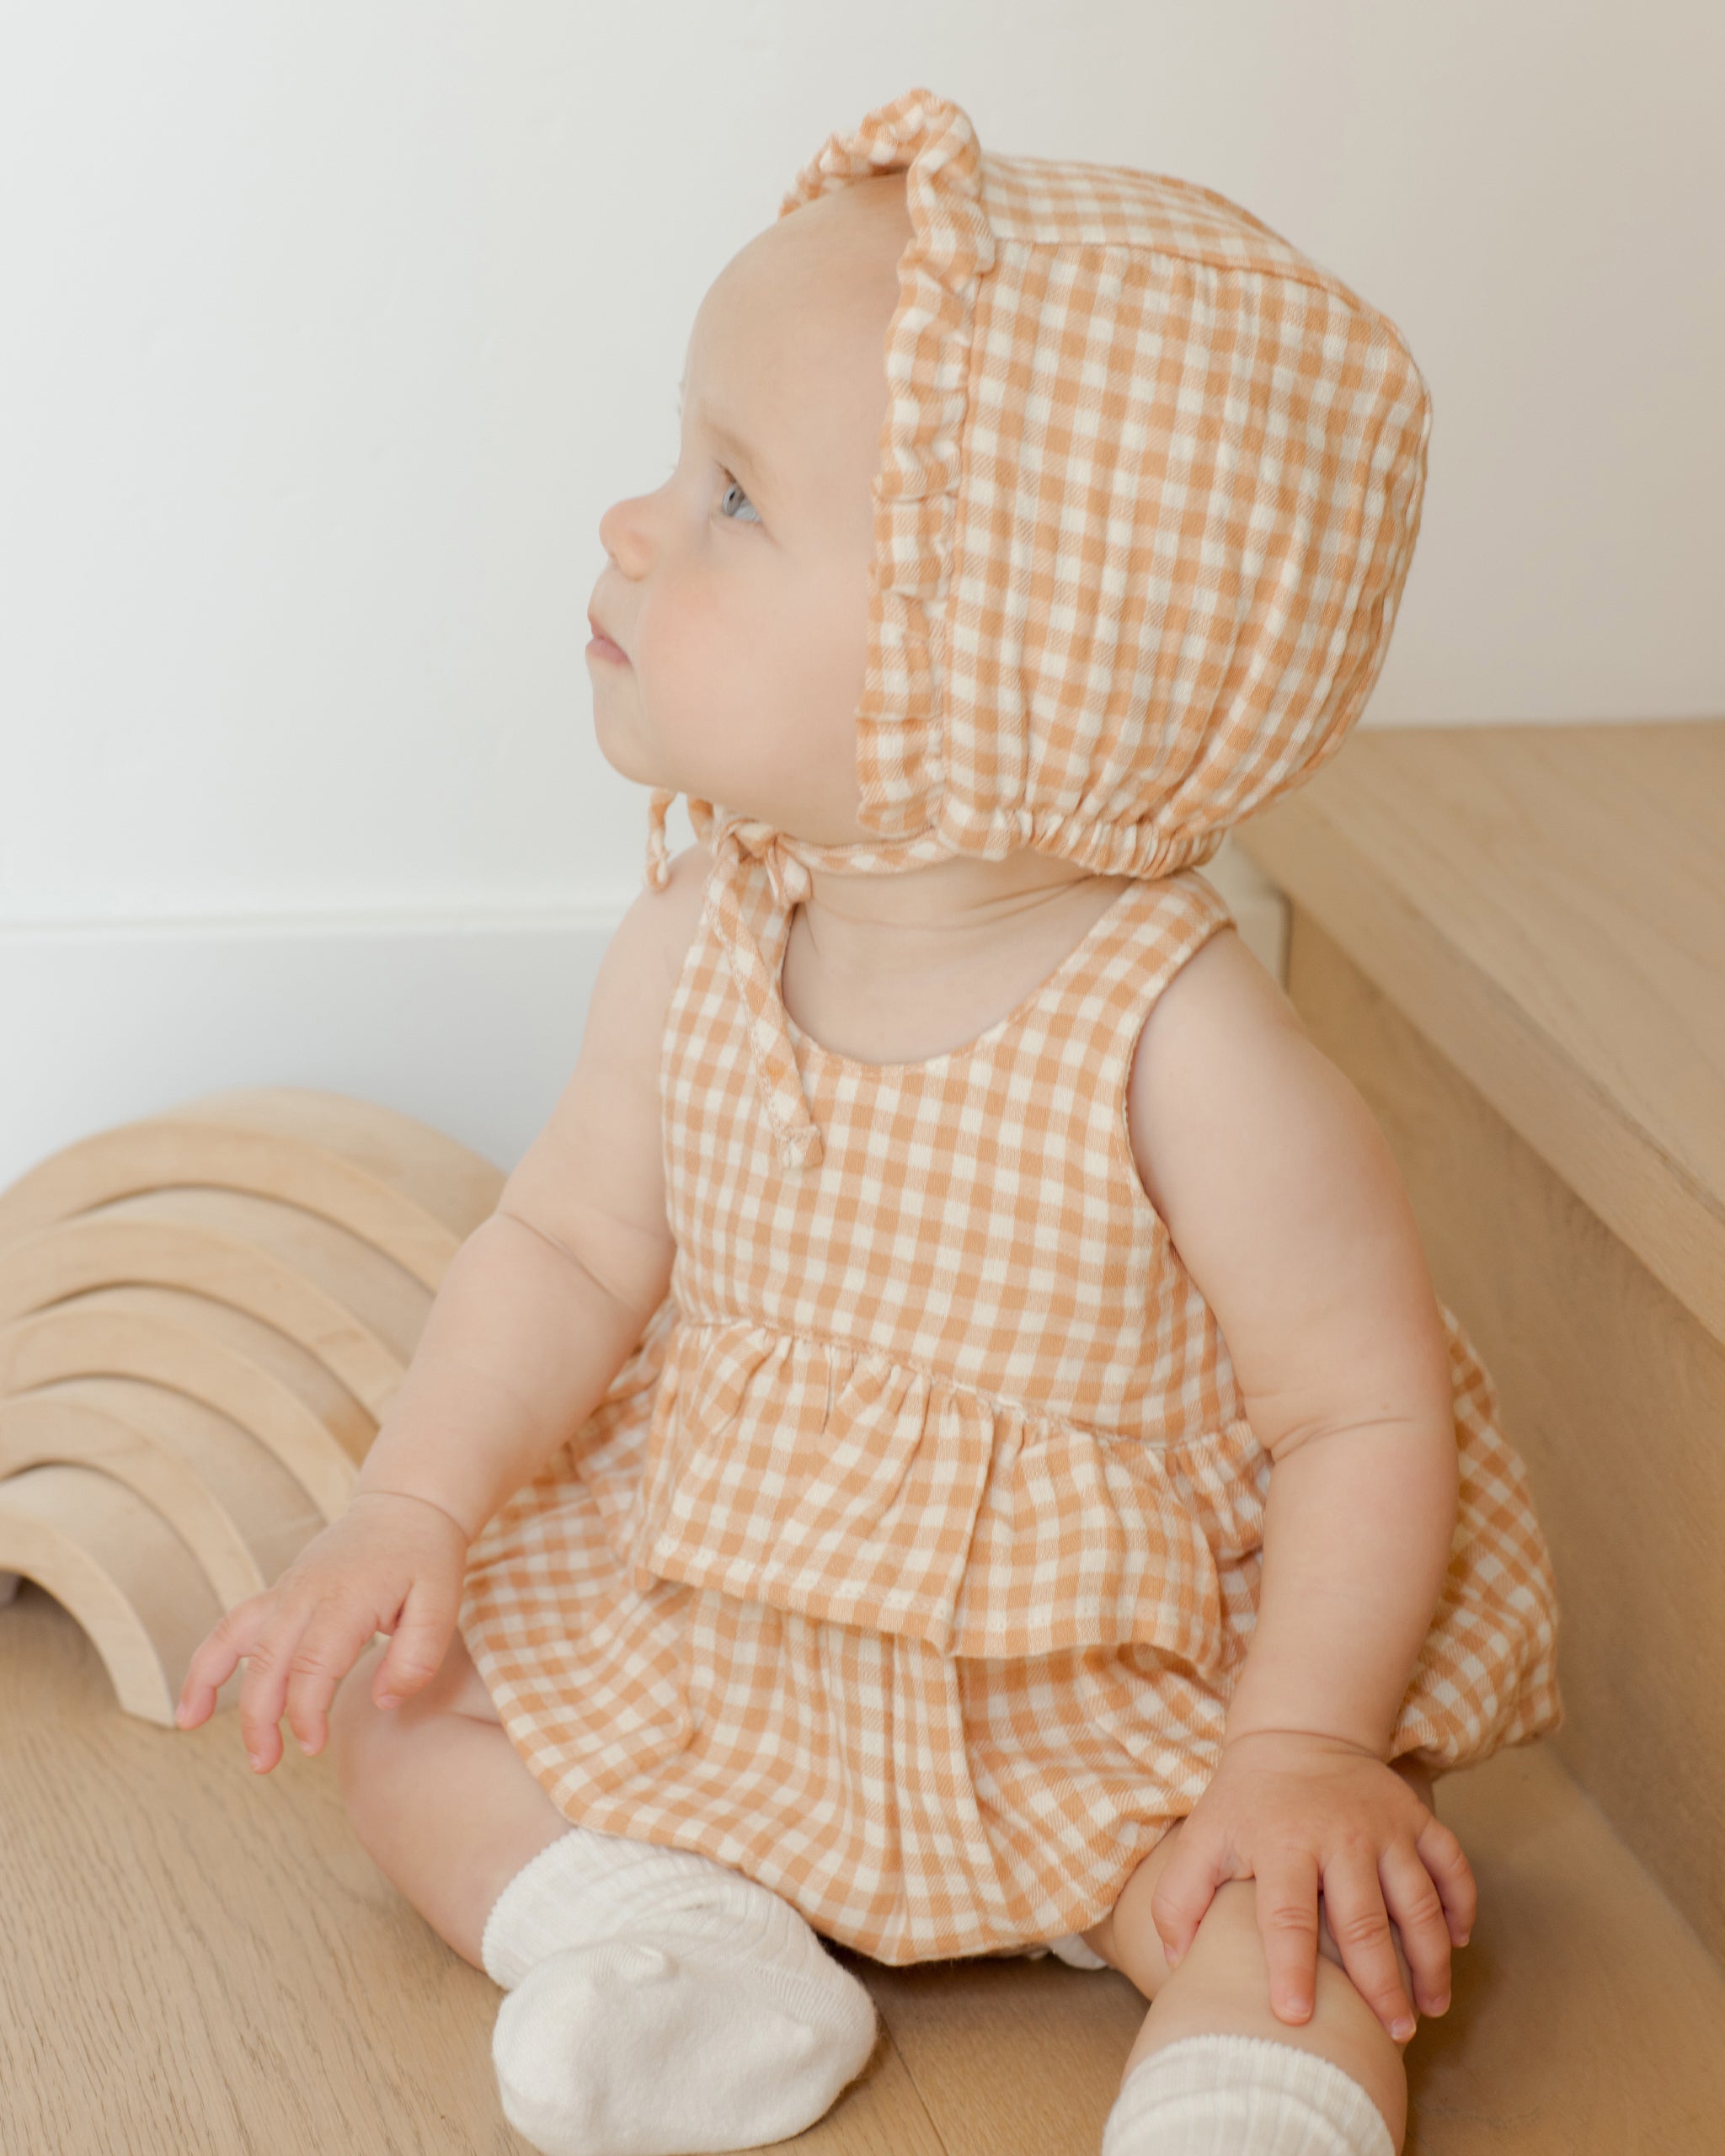 Penny Romper || Melon Gingham - Rylee + Cru | Kids Clothes | Trendy Baby Clothes | Modern Infant Outfits |